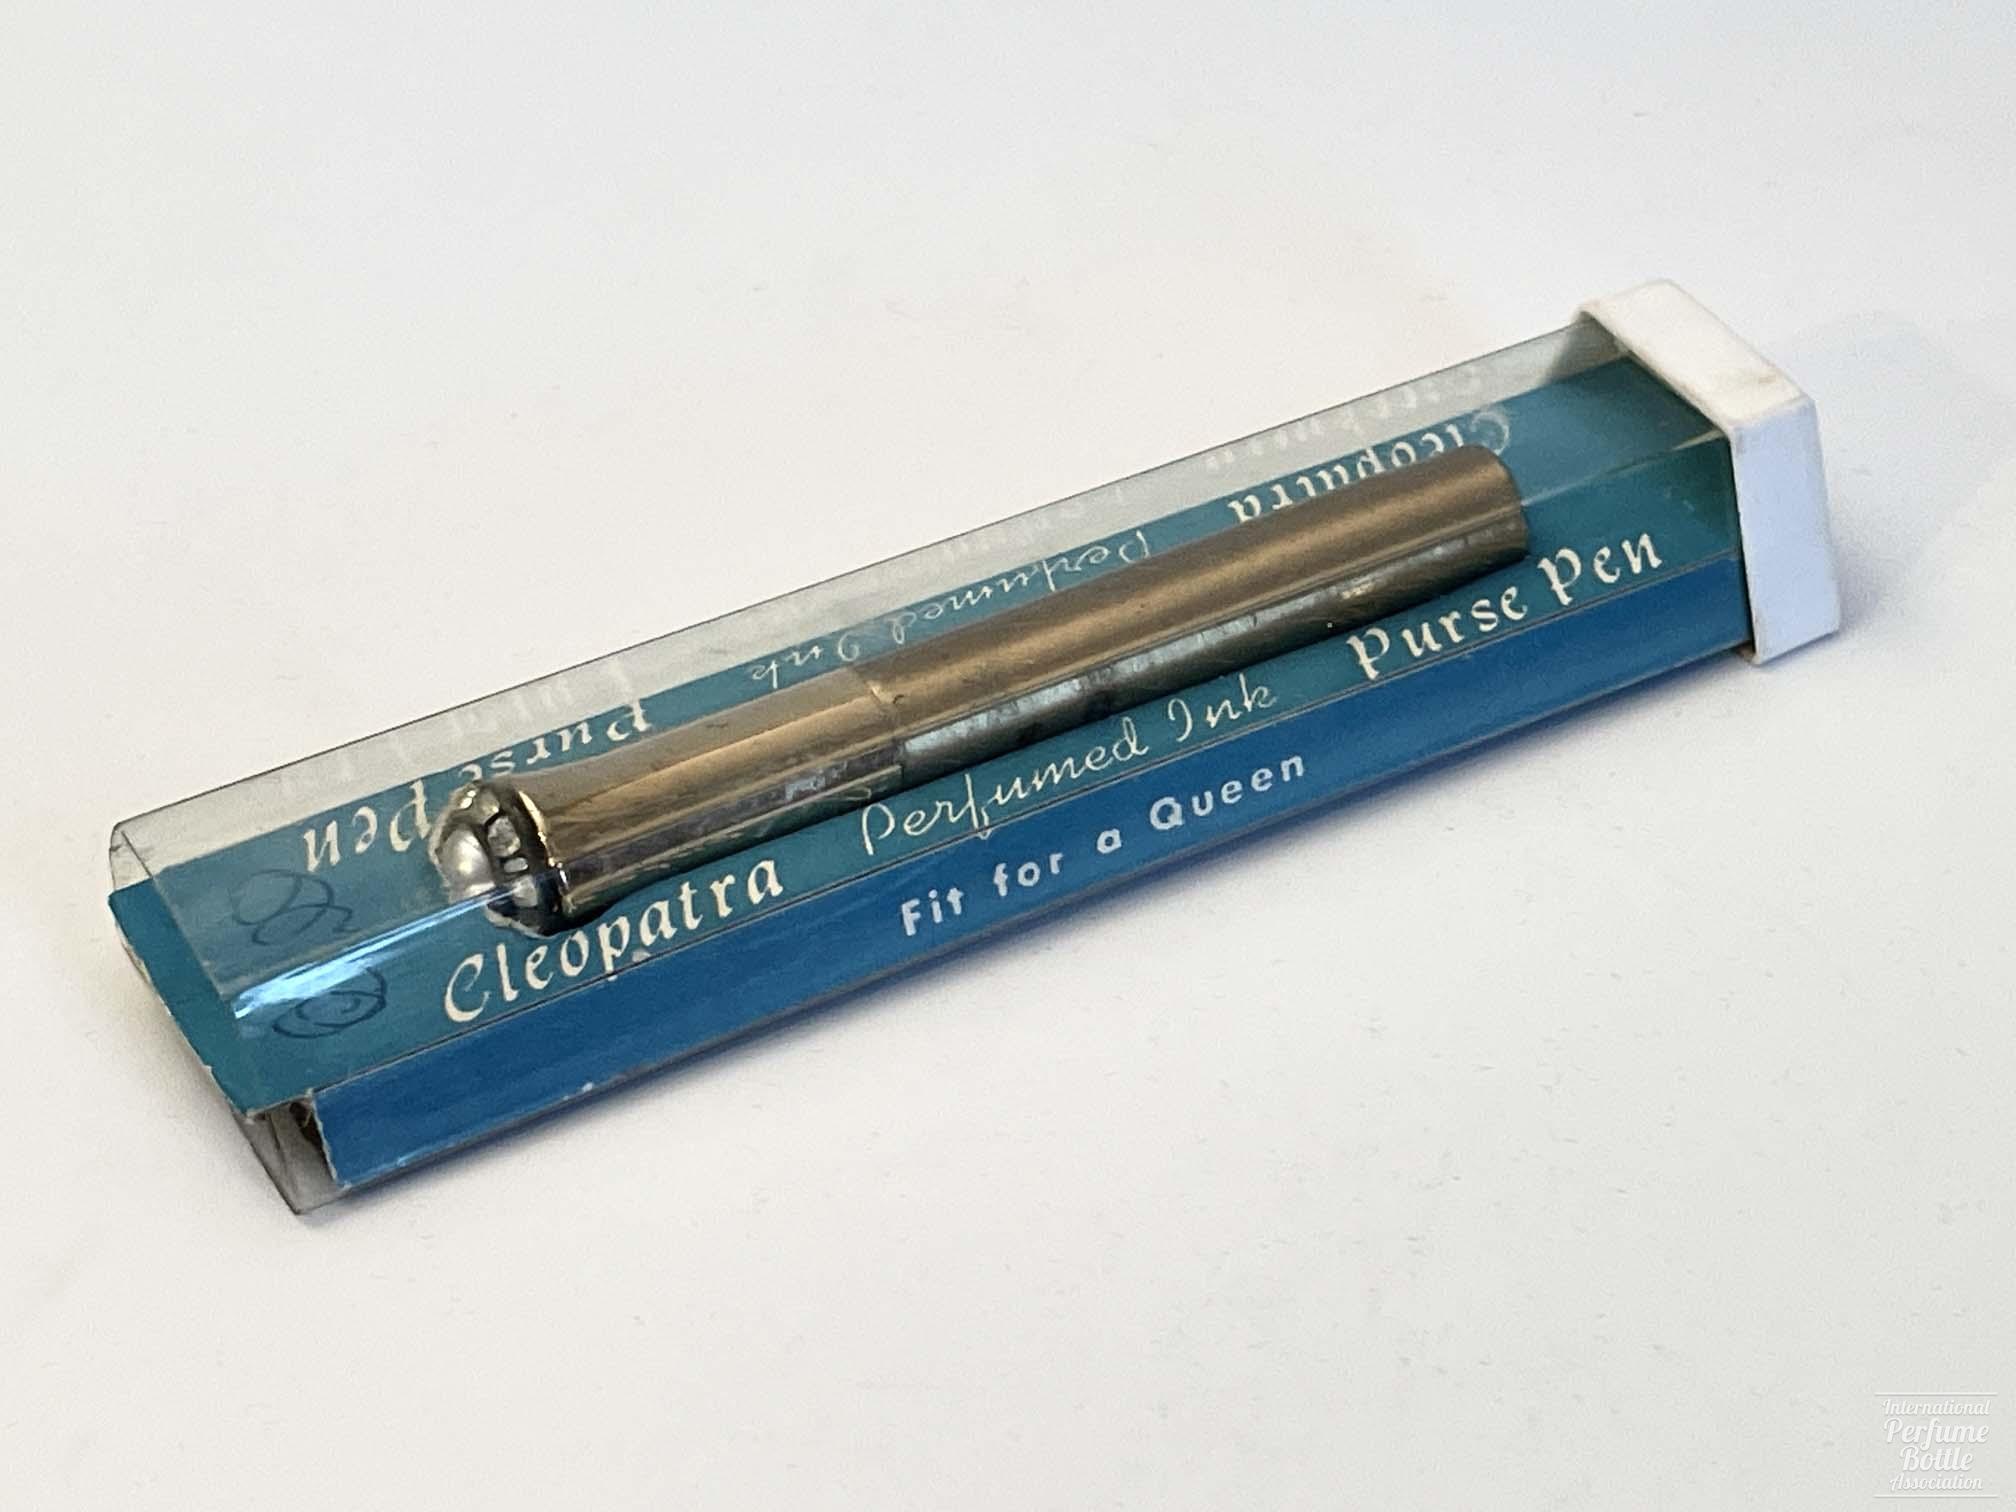 "Cleopatra" Scented Ink Pen by Richard Hudnut